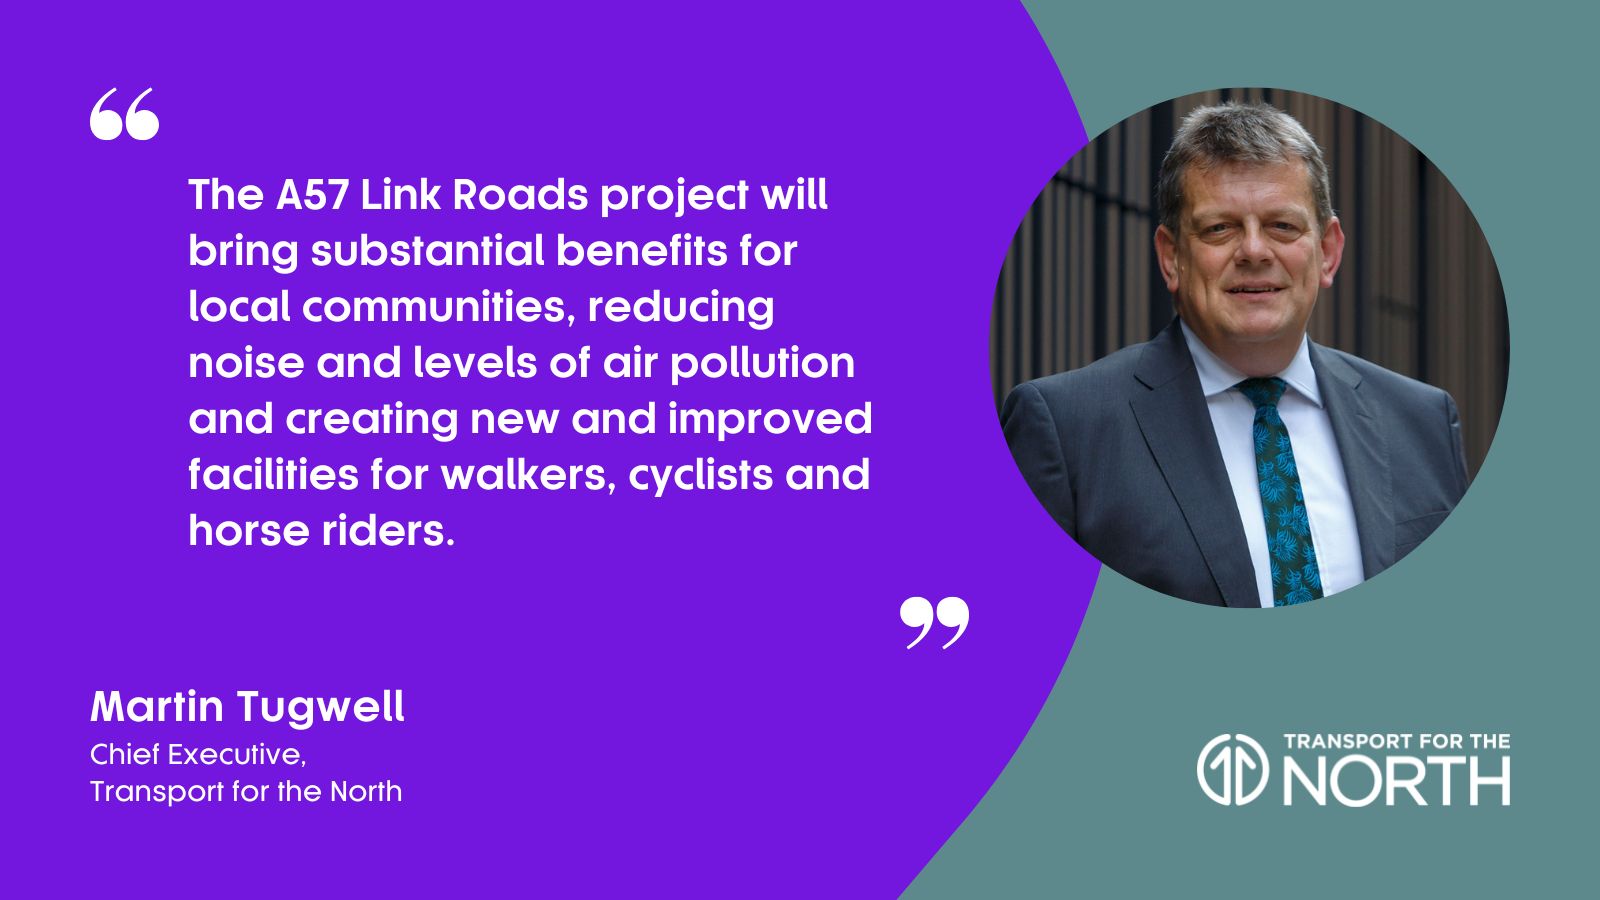 Martin Tugwell, Chief Executive at Transport for the North, on the A57 Link Roads project